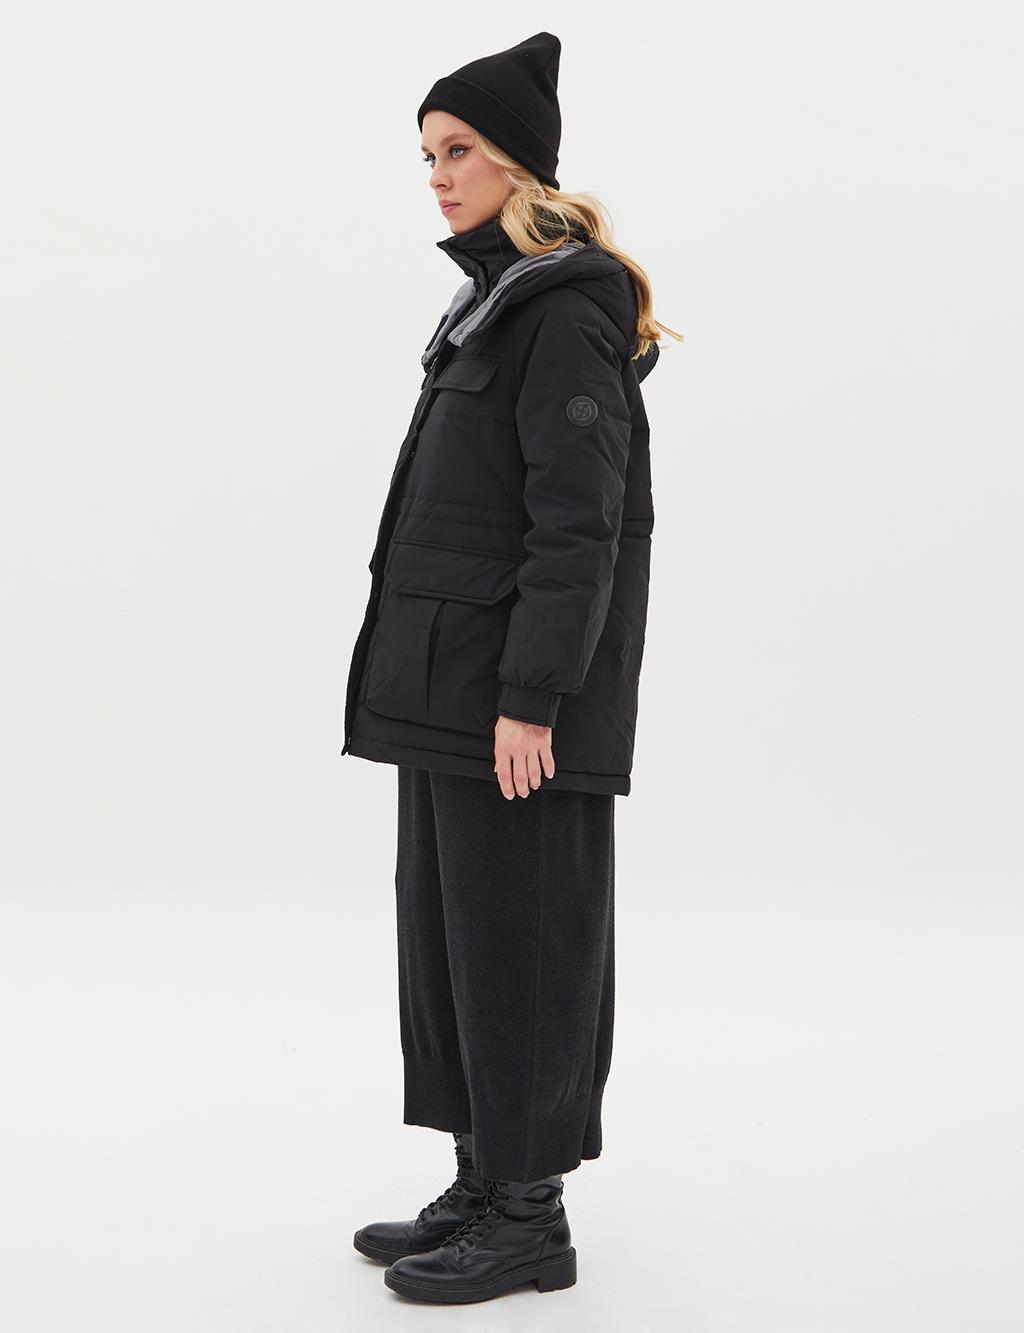 Pocket Detail Stand-up Collar Goose Feather Coat Black